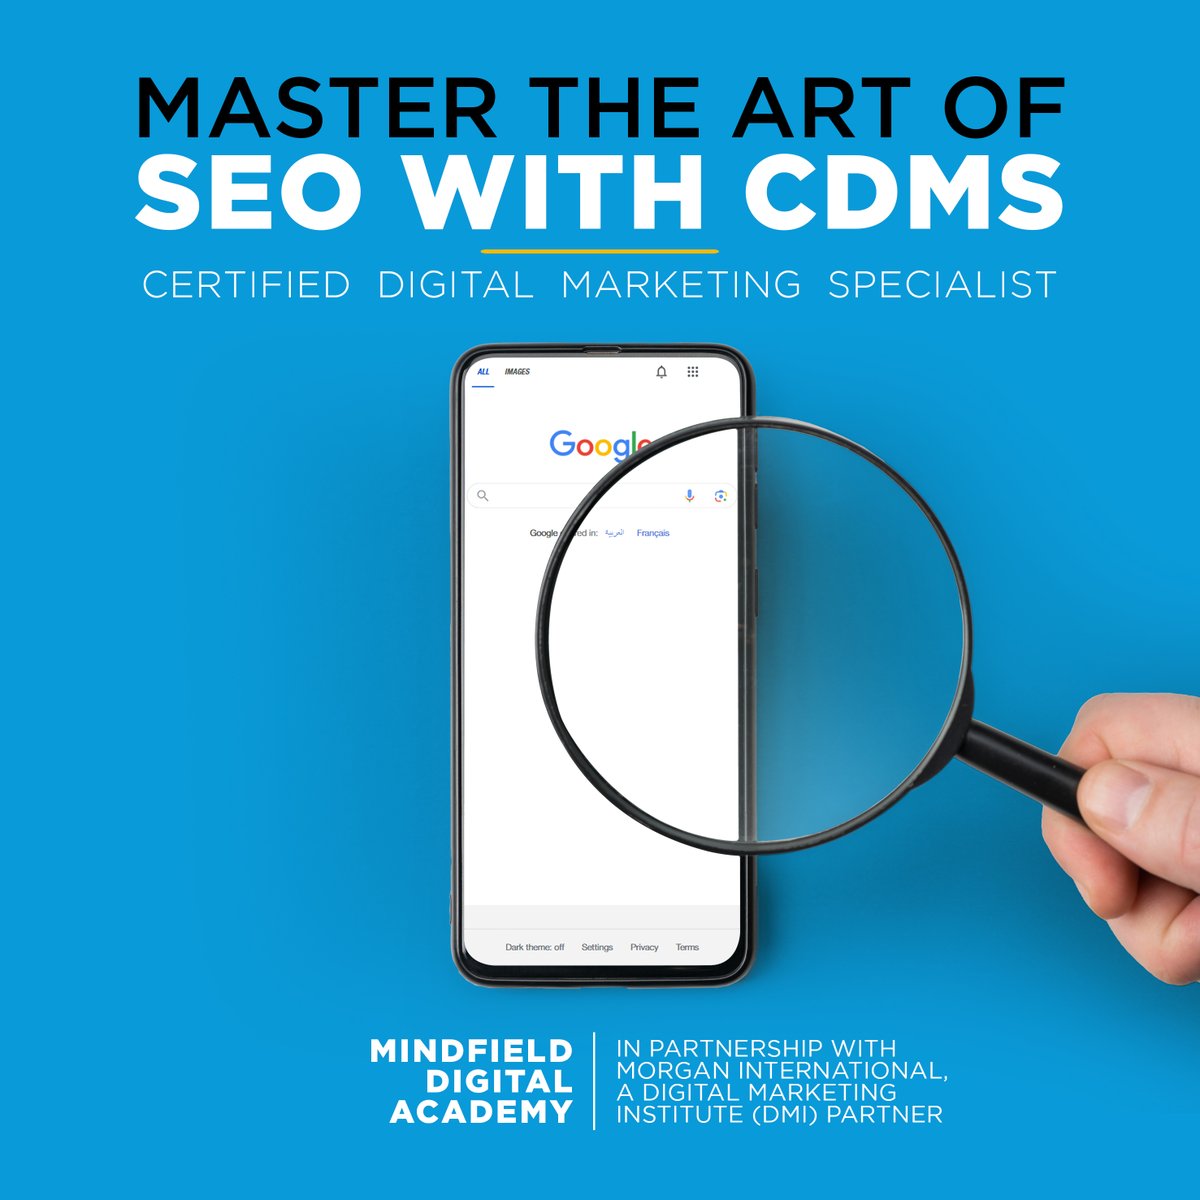 Become a globally certified SEO professional and supercharge your marketing game and career with our CDMS - Search Marketing specialized certification. Let's turn those clicks into conversions 💡

Enroll now!

#MindFieldDigital #SEO #MindFieldAcademy